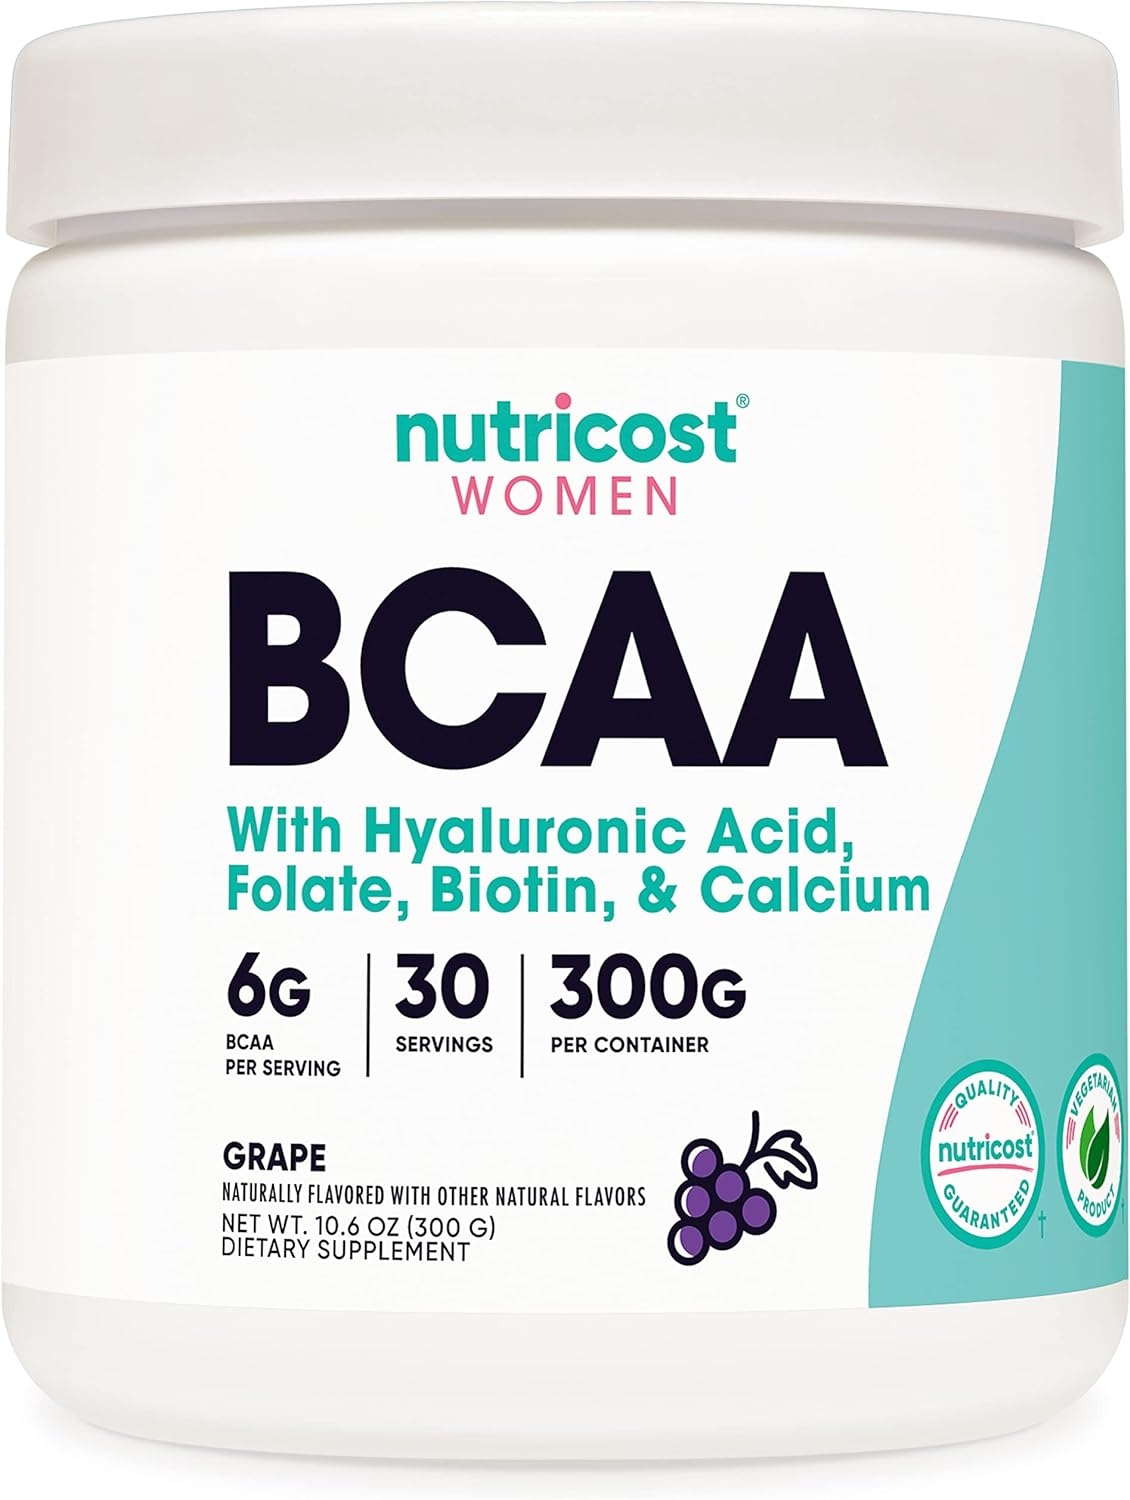 Nutricost BCAA for Women (Grape, 30 Servings) - Formulated Specifically for Women - Non-GMO and Gluten-Free